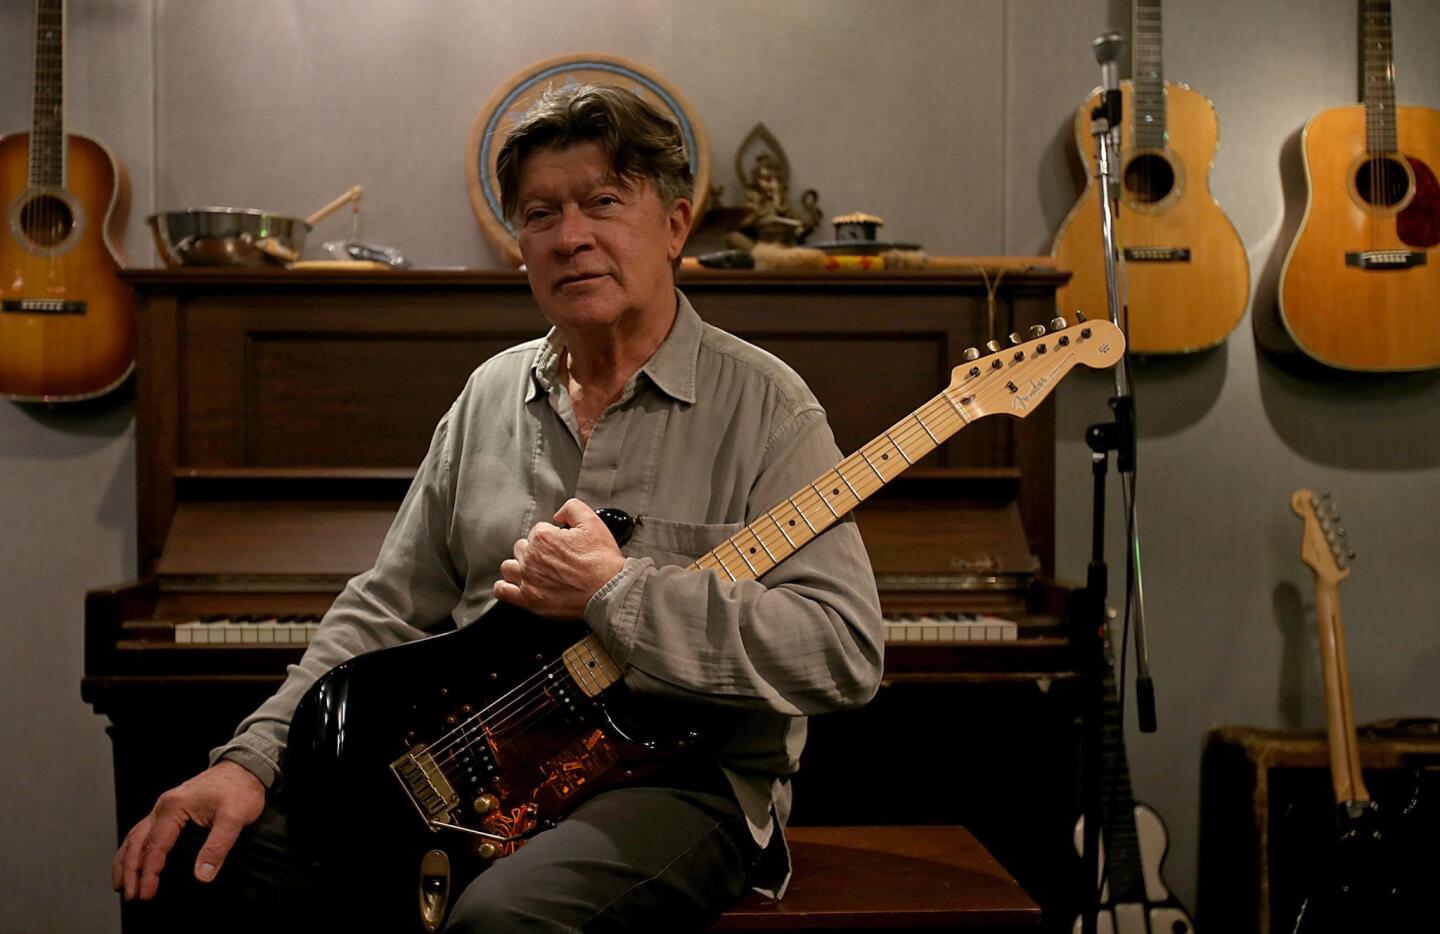 Robbie Robertson, lead guitarist for the Band, holds a recent incarnation of the Fender Stratocaster electric guitar, a music industry standard that is celebrating its 60th anniversary this year.